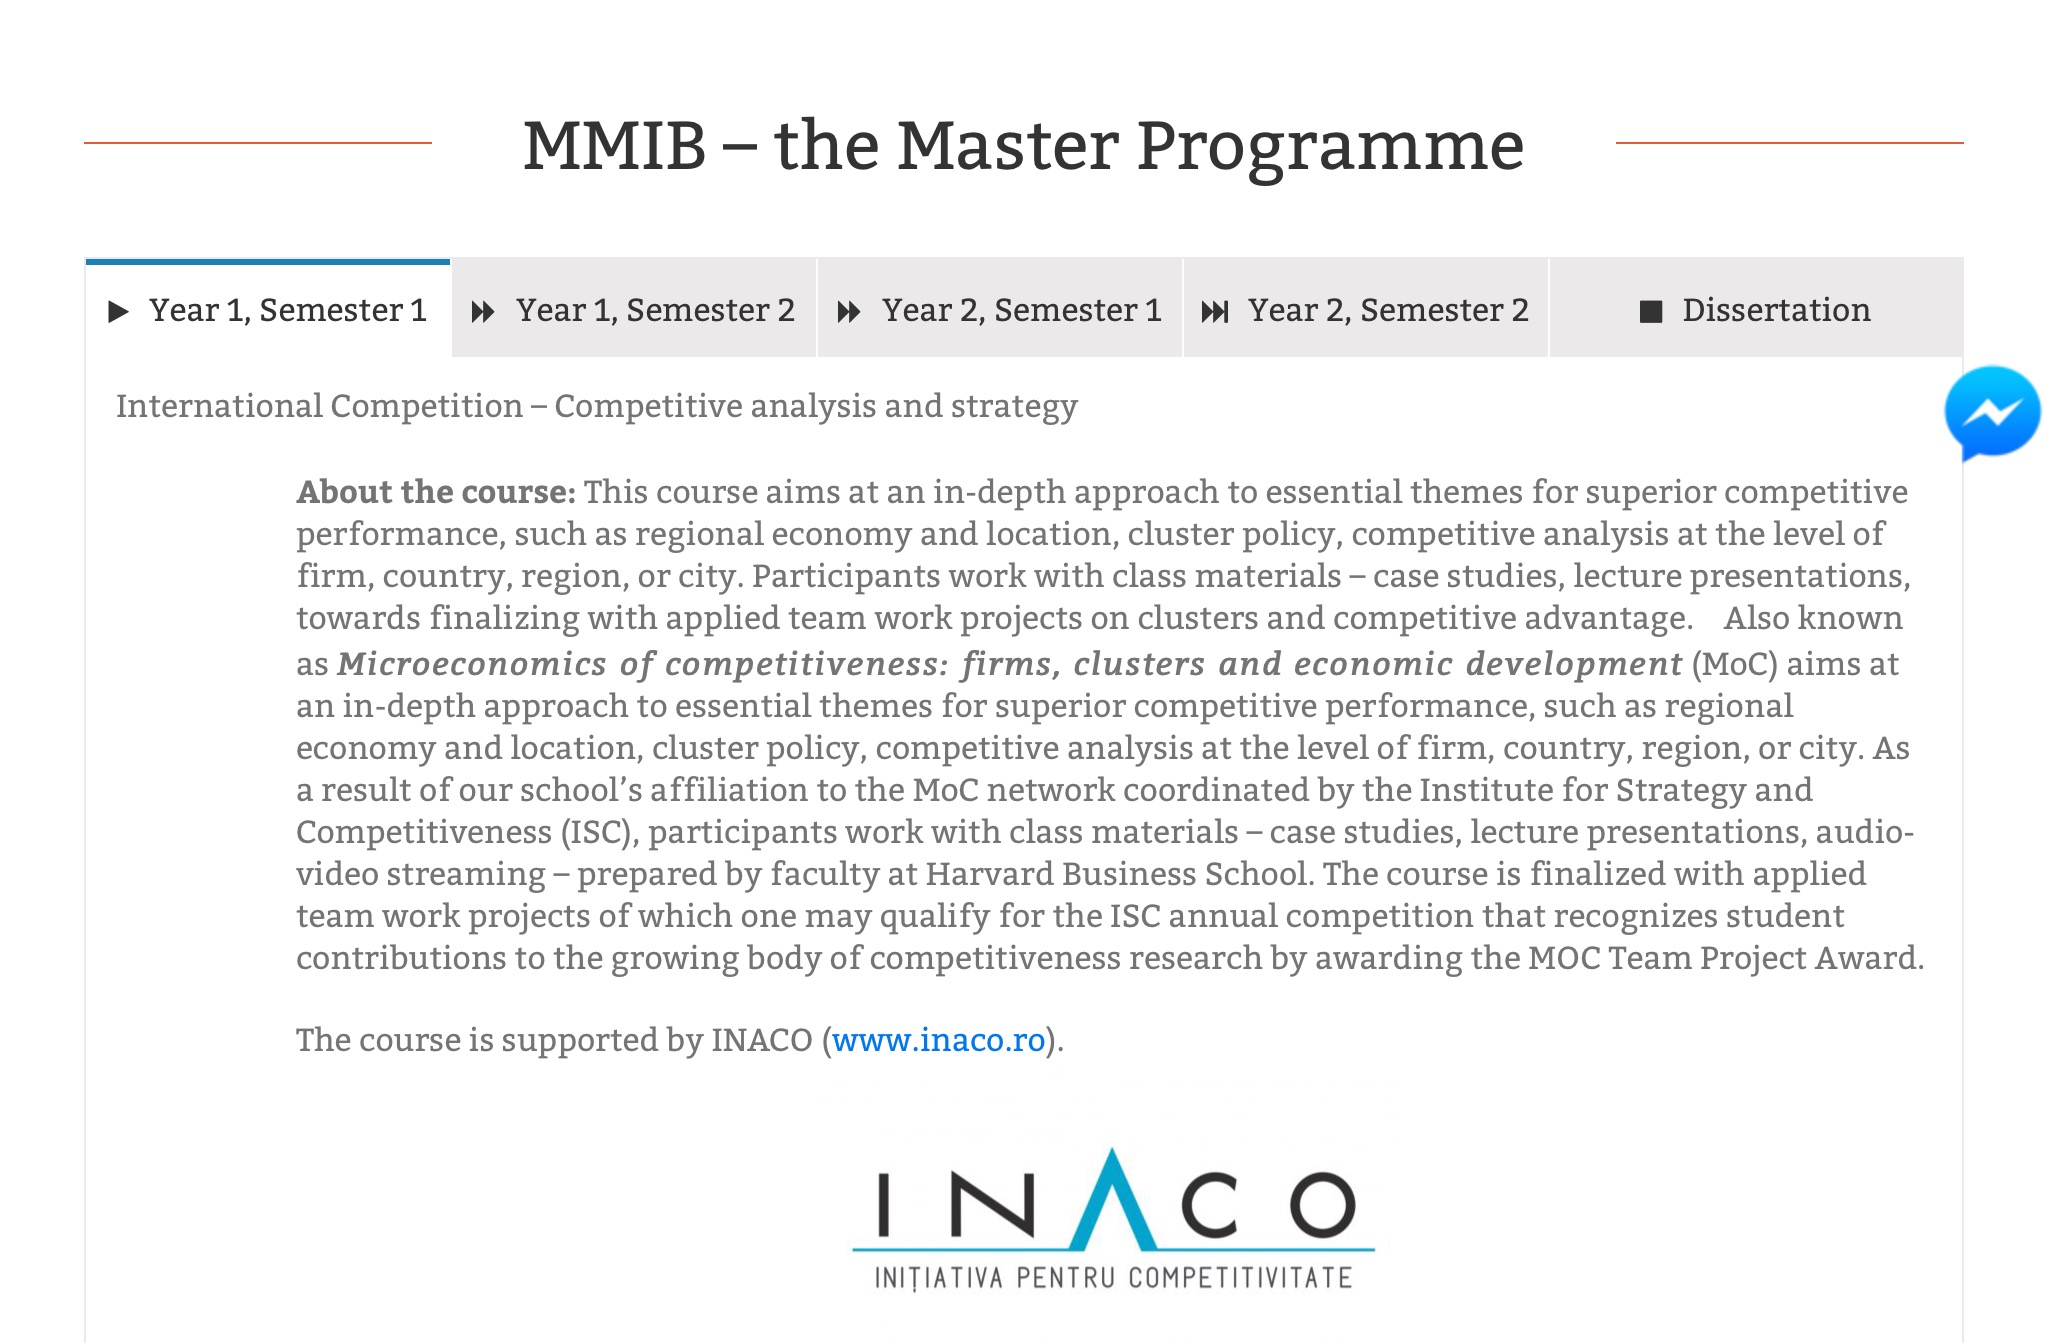 INACO helped shape the International Competitive Strategy and Analysis course from the best MA in International Business and Management in Romania